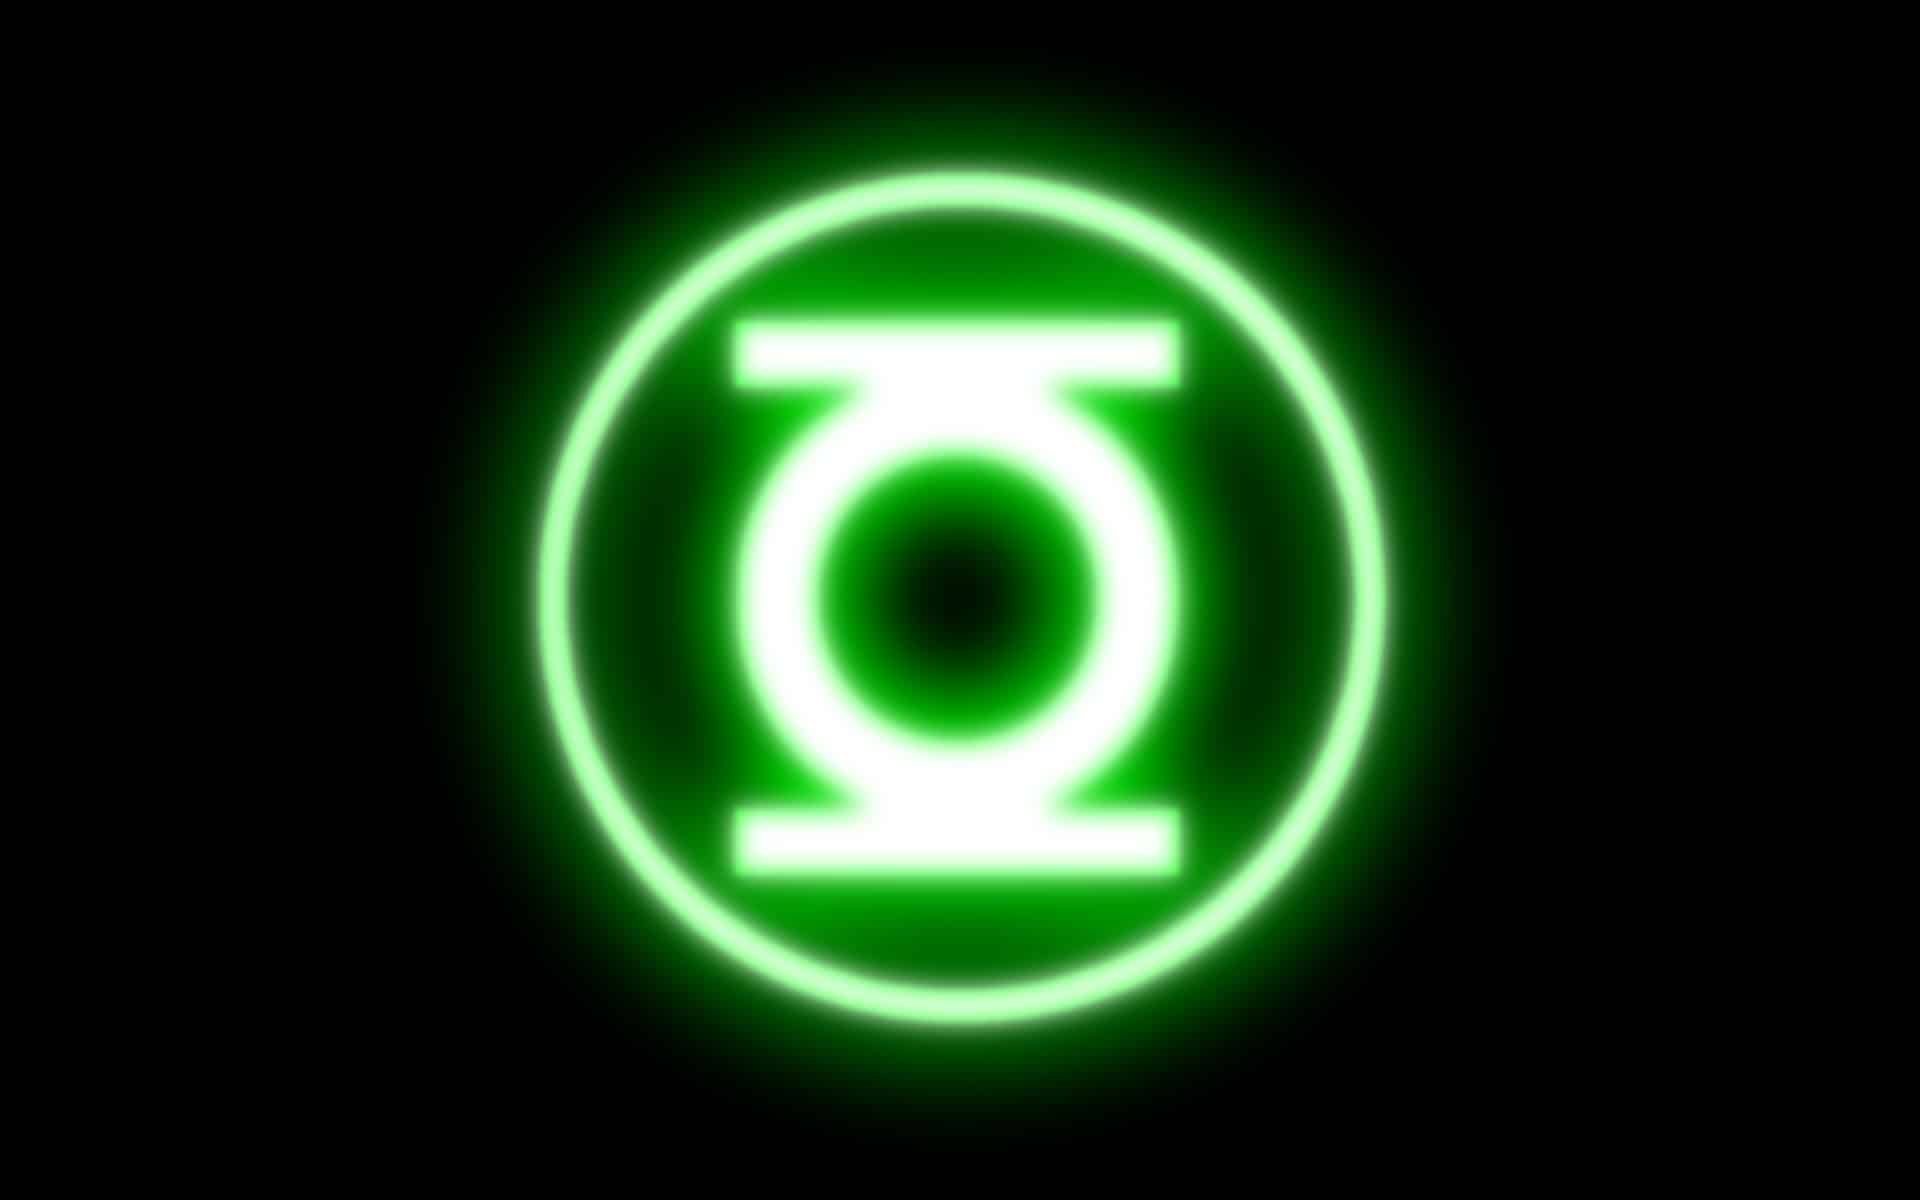 When Will We See GREEN LANTERN In The DC Cinematic Universe?